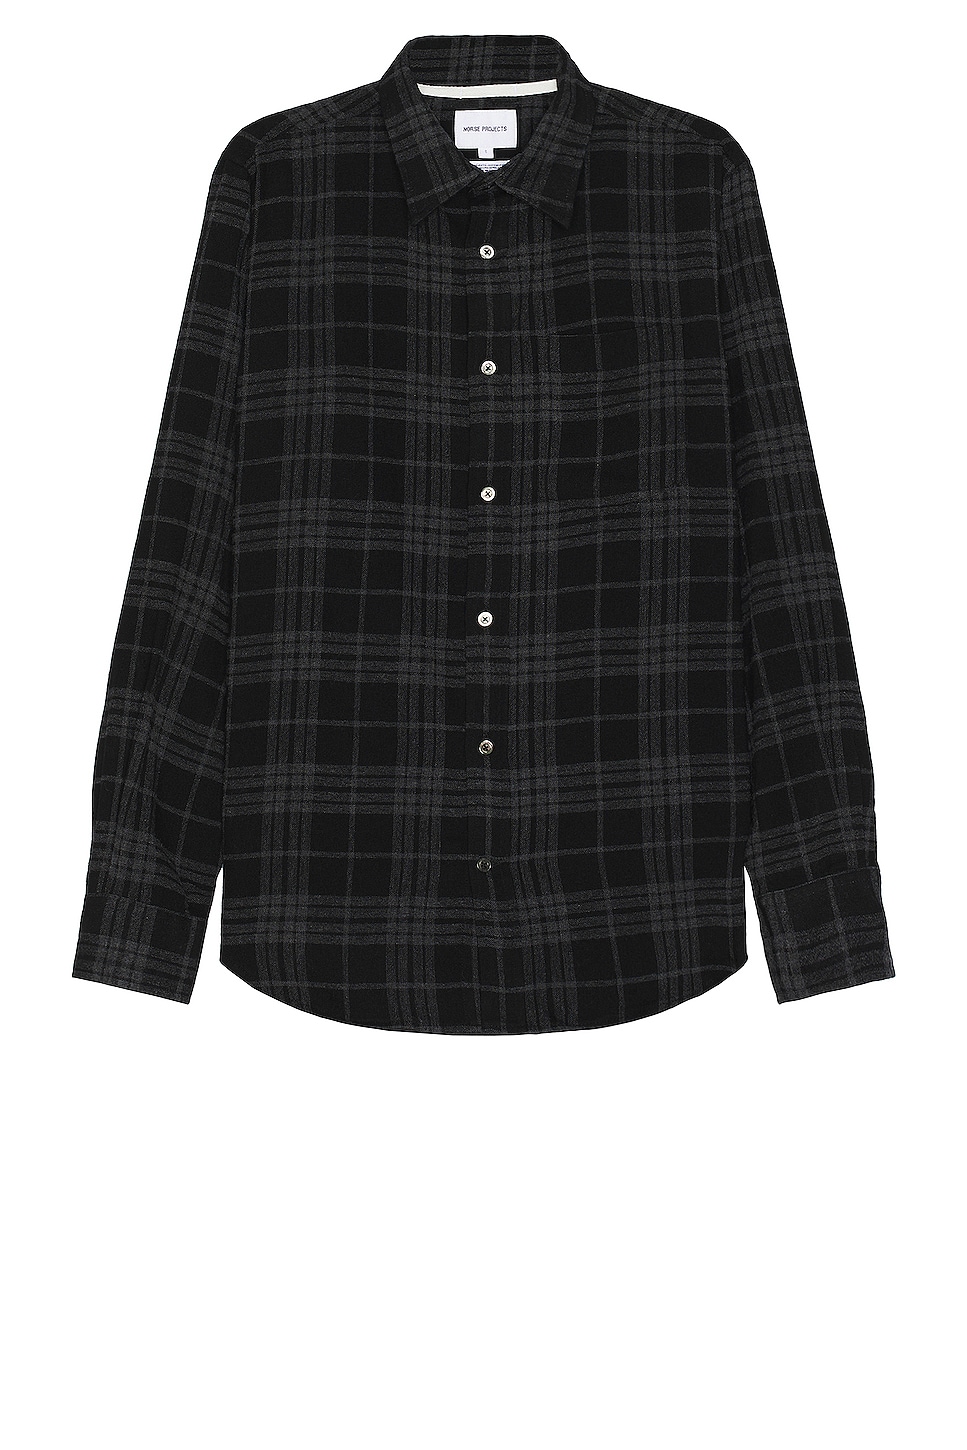 Image 1 of Norse Projects Algot Relaxed Wool Check Shirt in Charcoal Melange